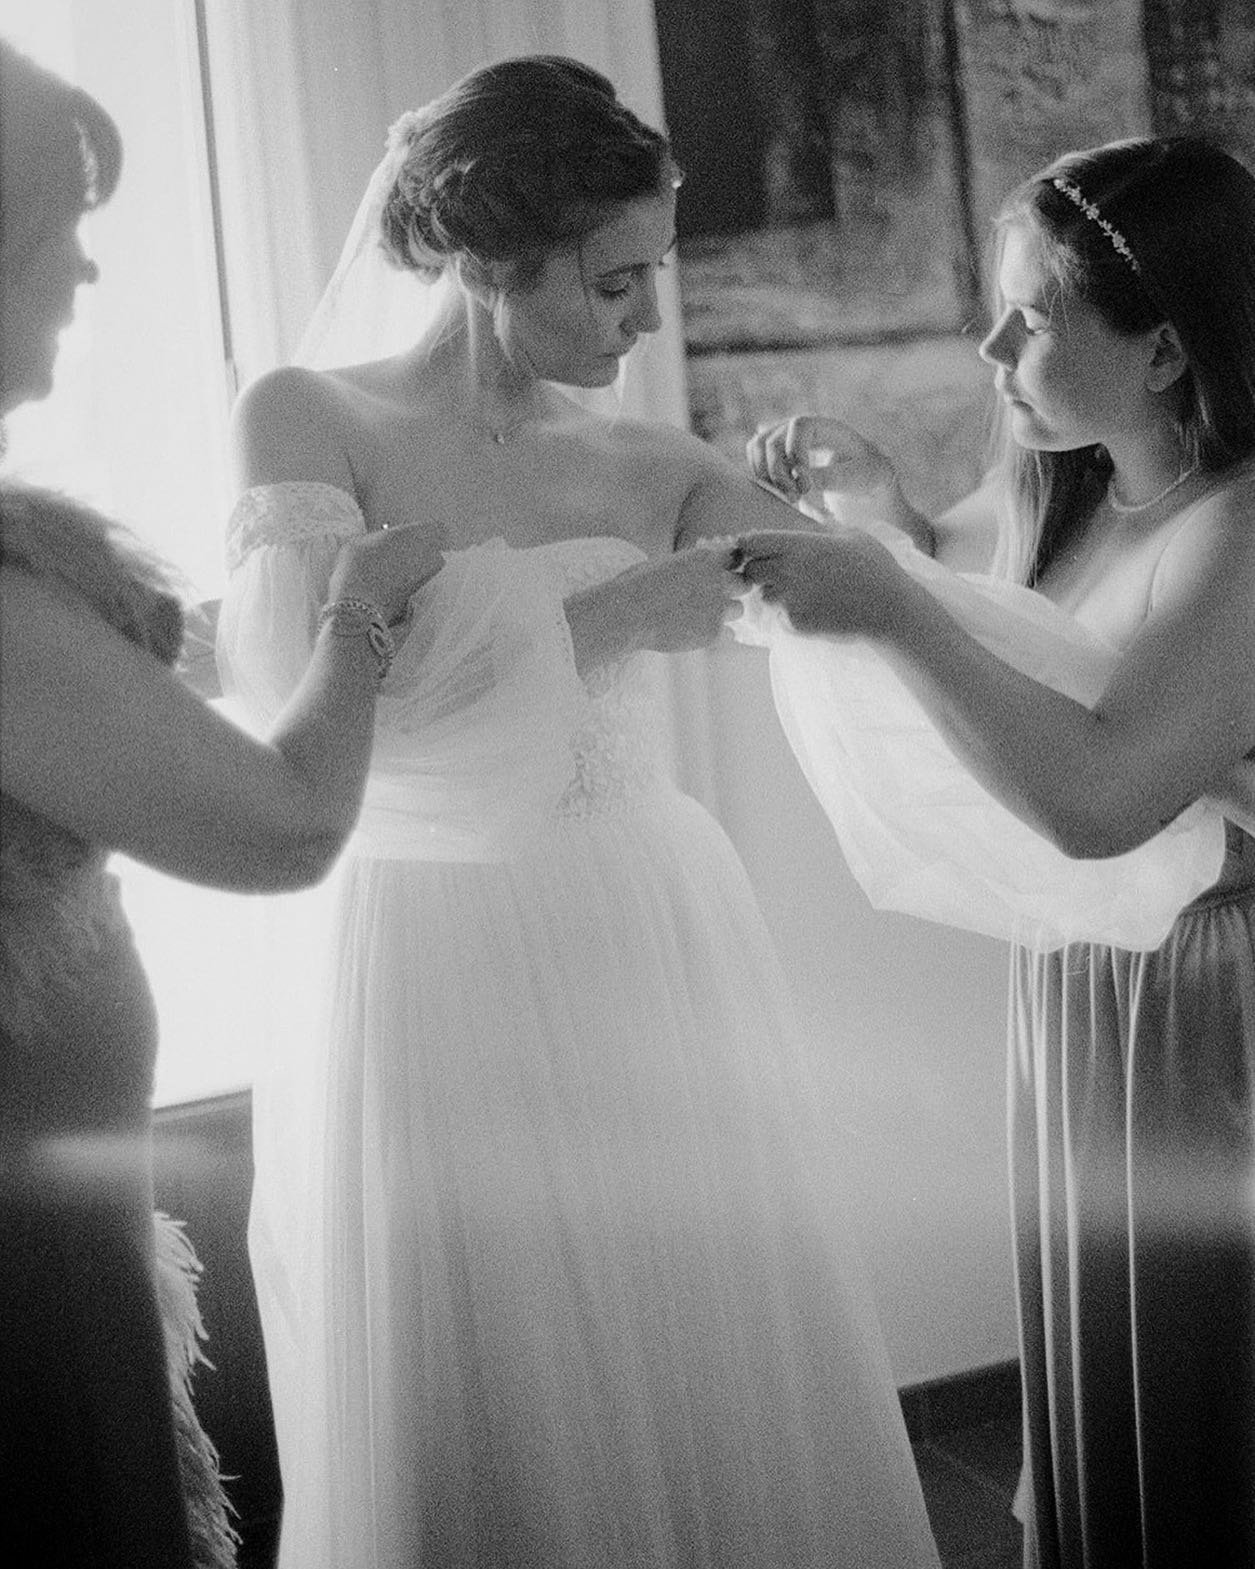 Elena's mother and sister were helping her put on the sleeves of her dress. When I checked the roll I shot in this room, I realized that light had entered the camera in some exposures, passing through some shots, and making them even more special.